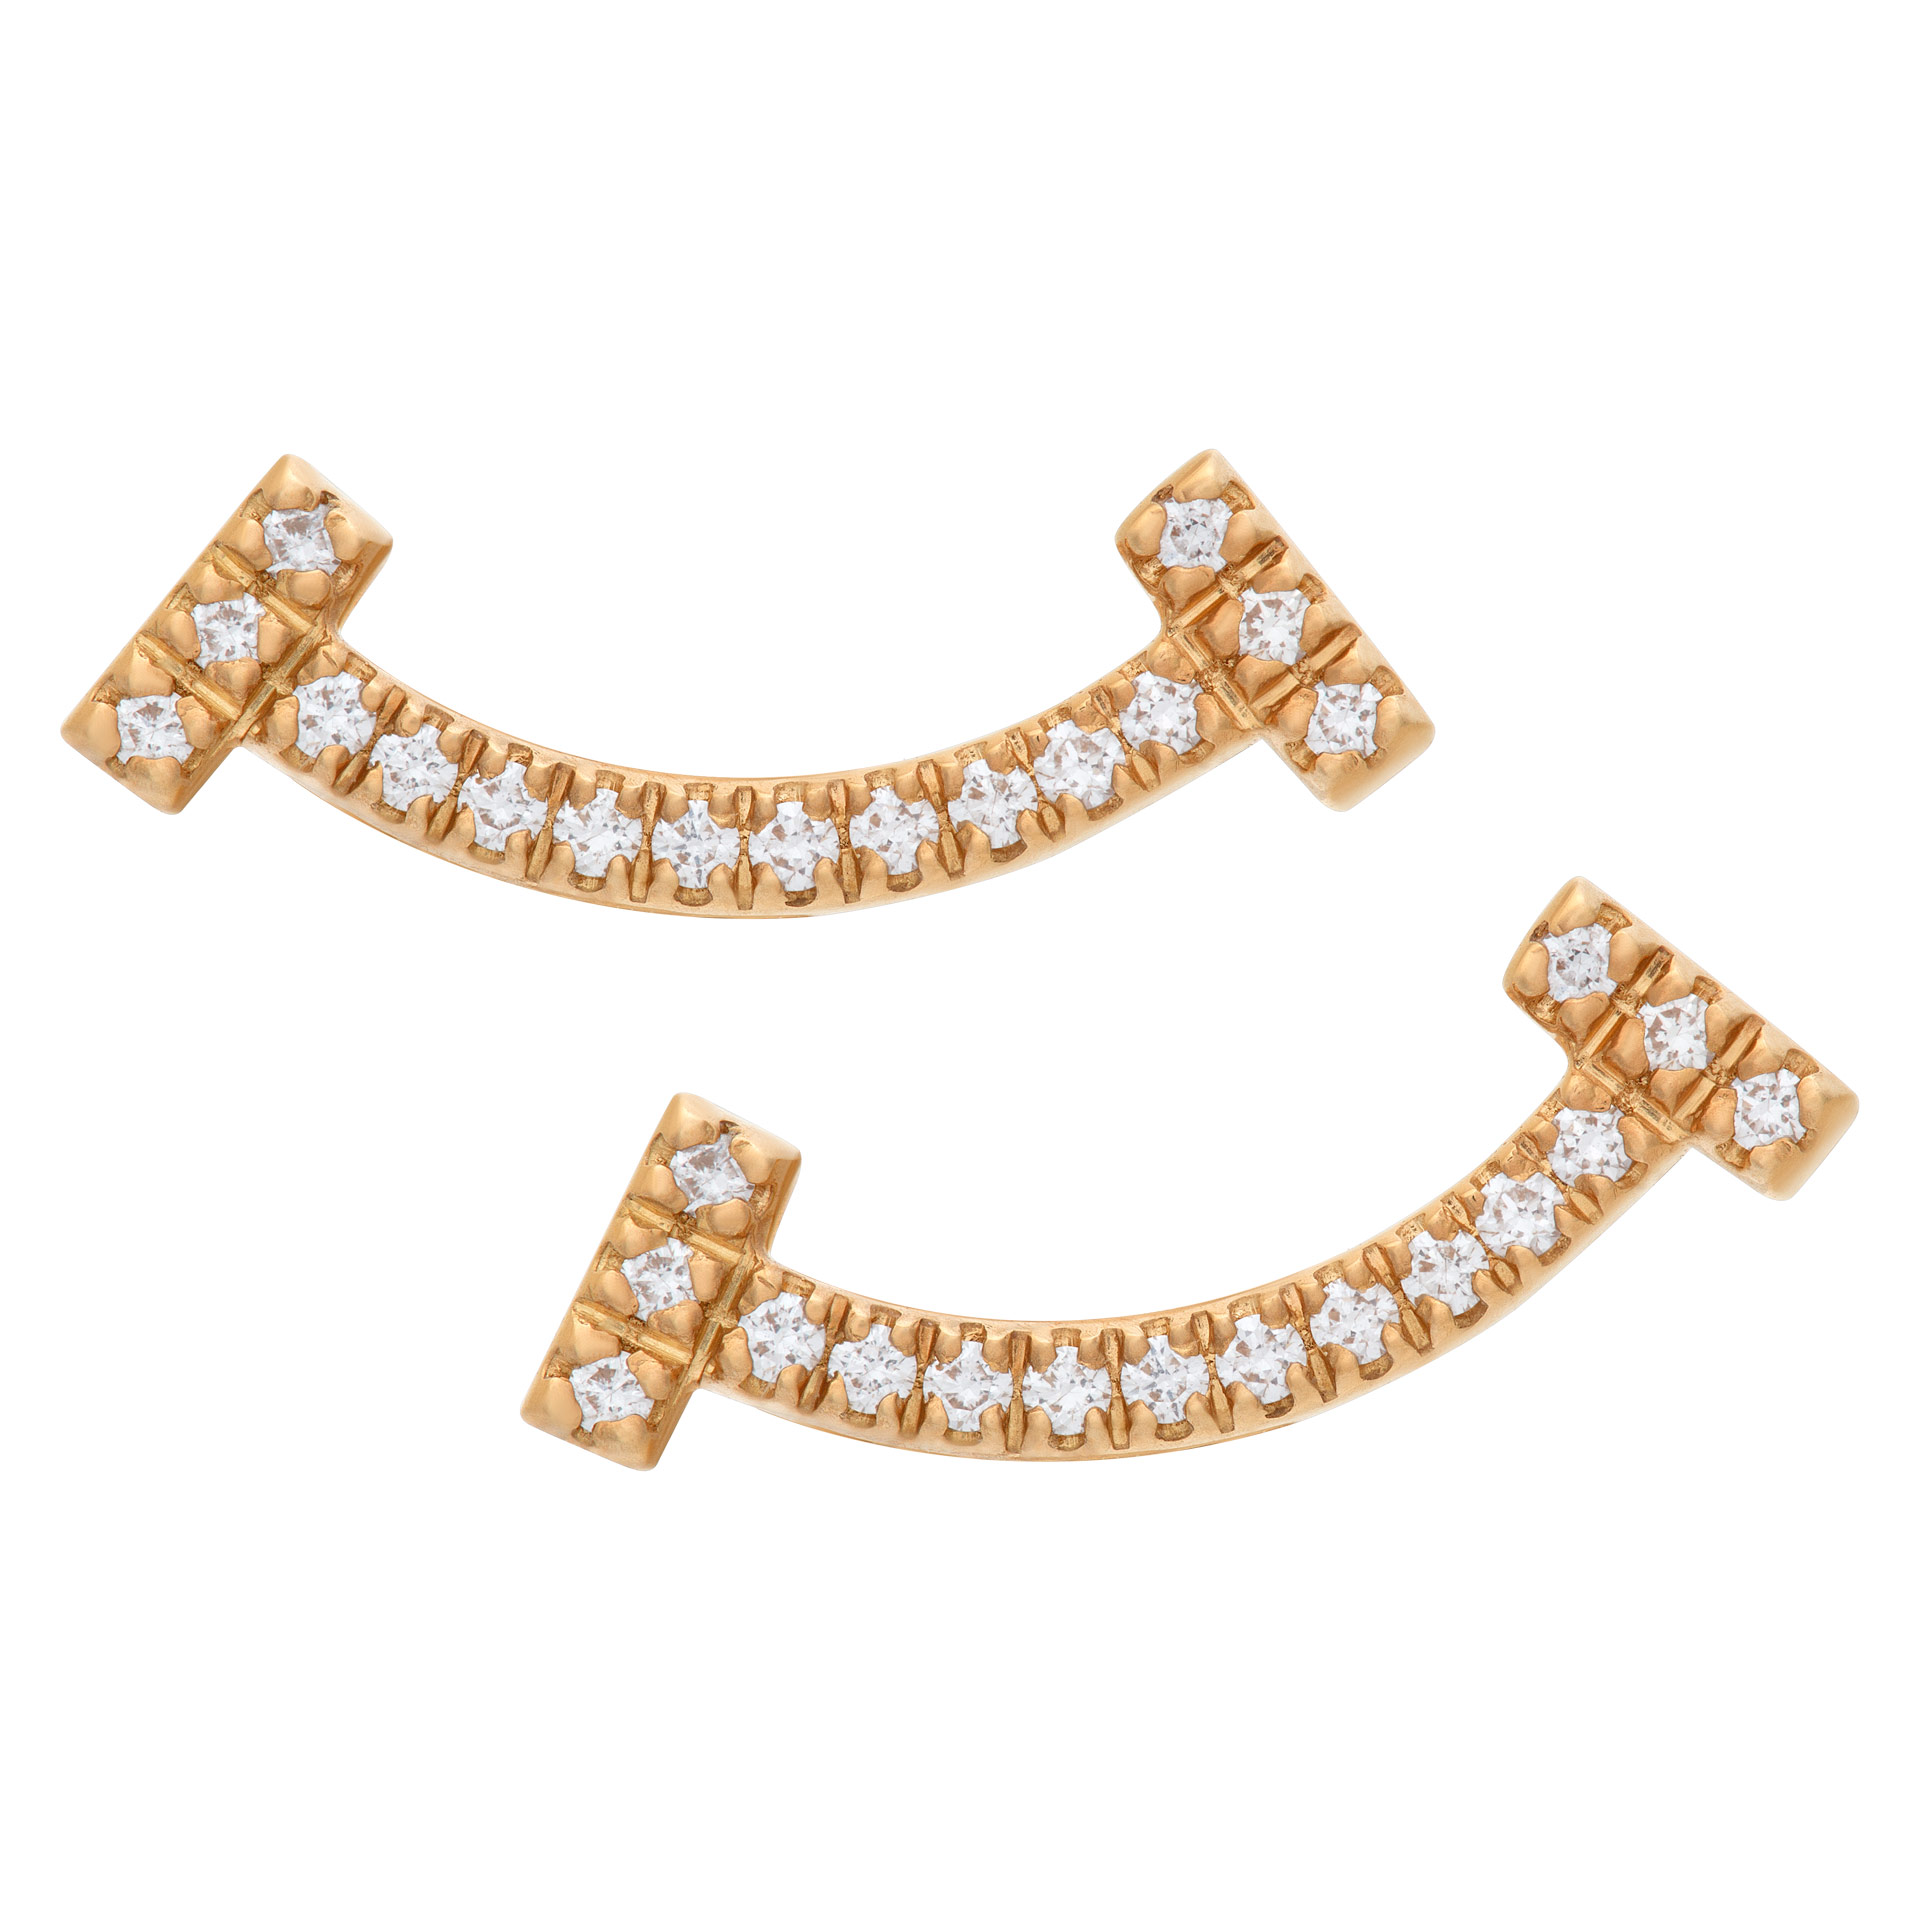 Tiffany & Co. diamond smile earrings in 18k rose gold with total carat weight of 0.06 carat image 1